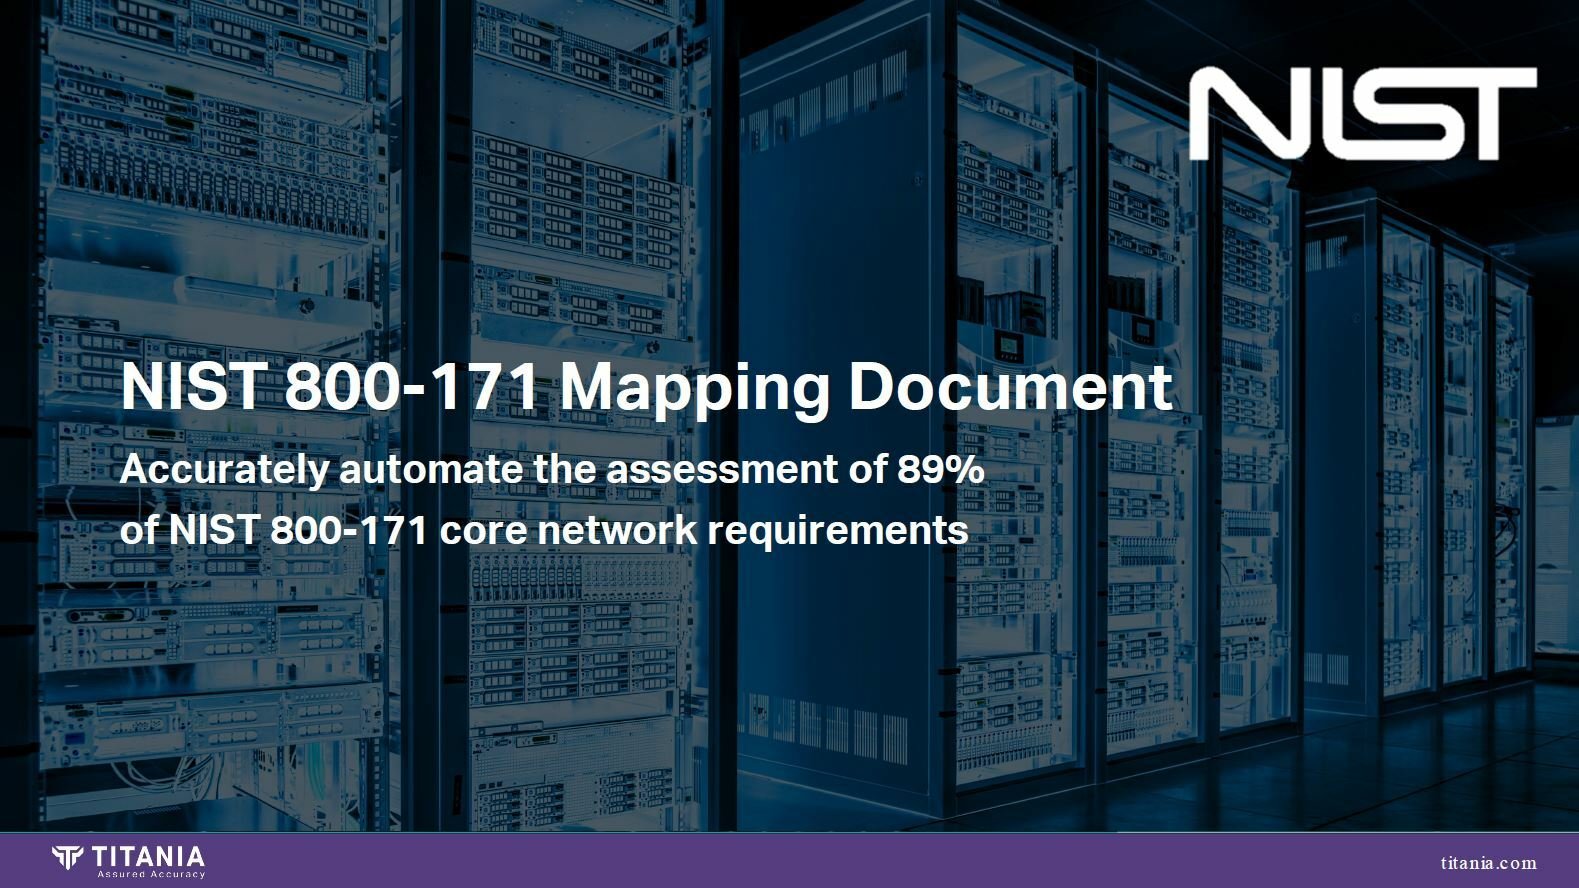 NIST 800-171 Mapping Document